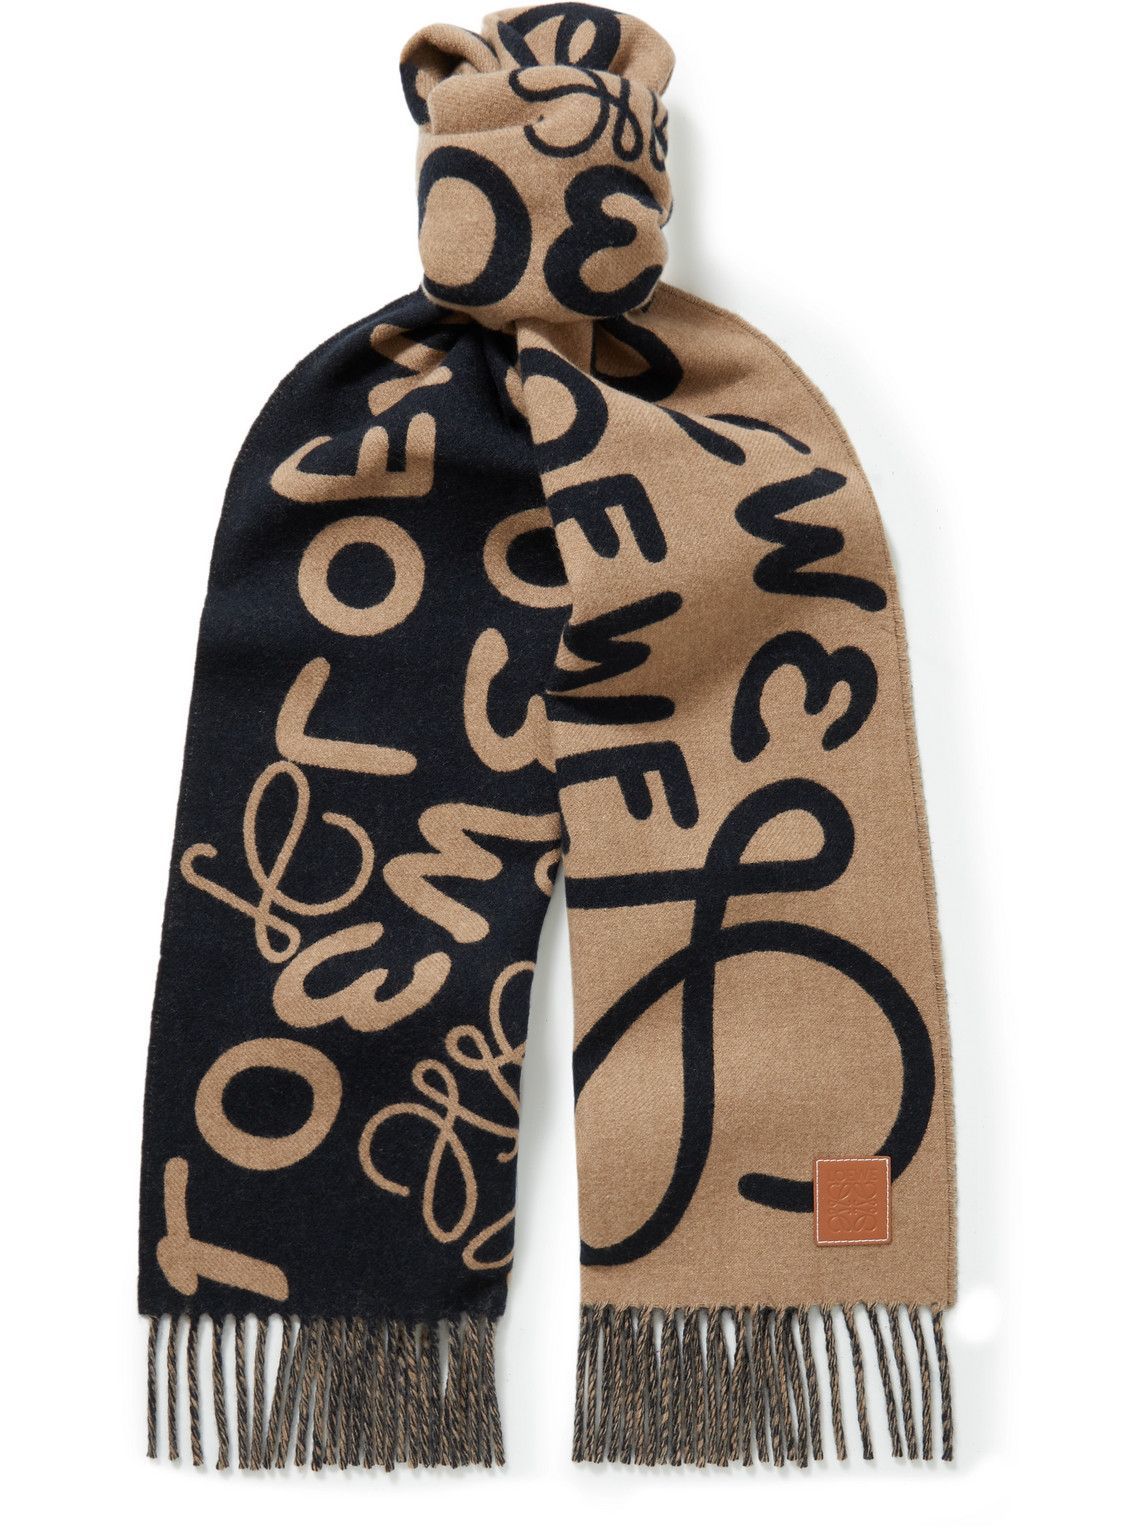 Loewe - Leather-Trimmed Fringed Wool and Cashmere-Blend Jacquard 